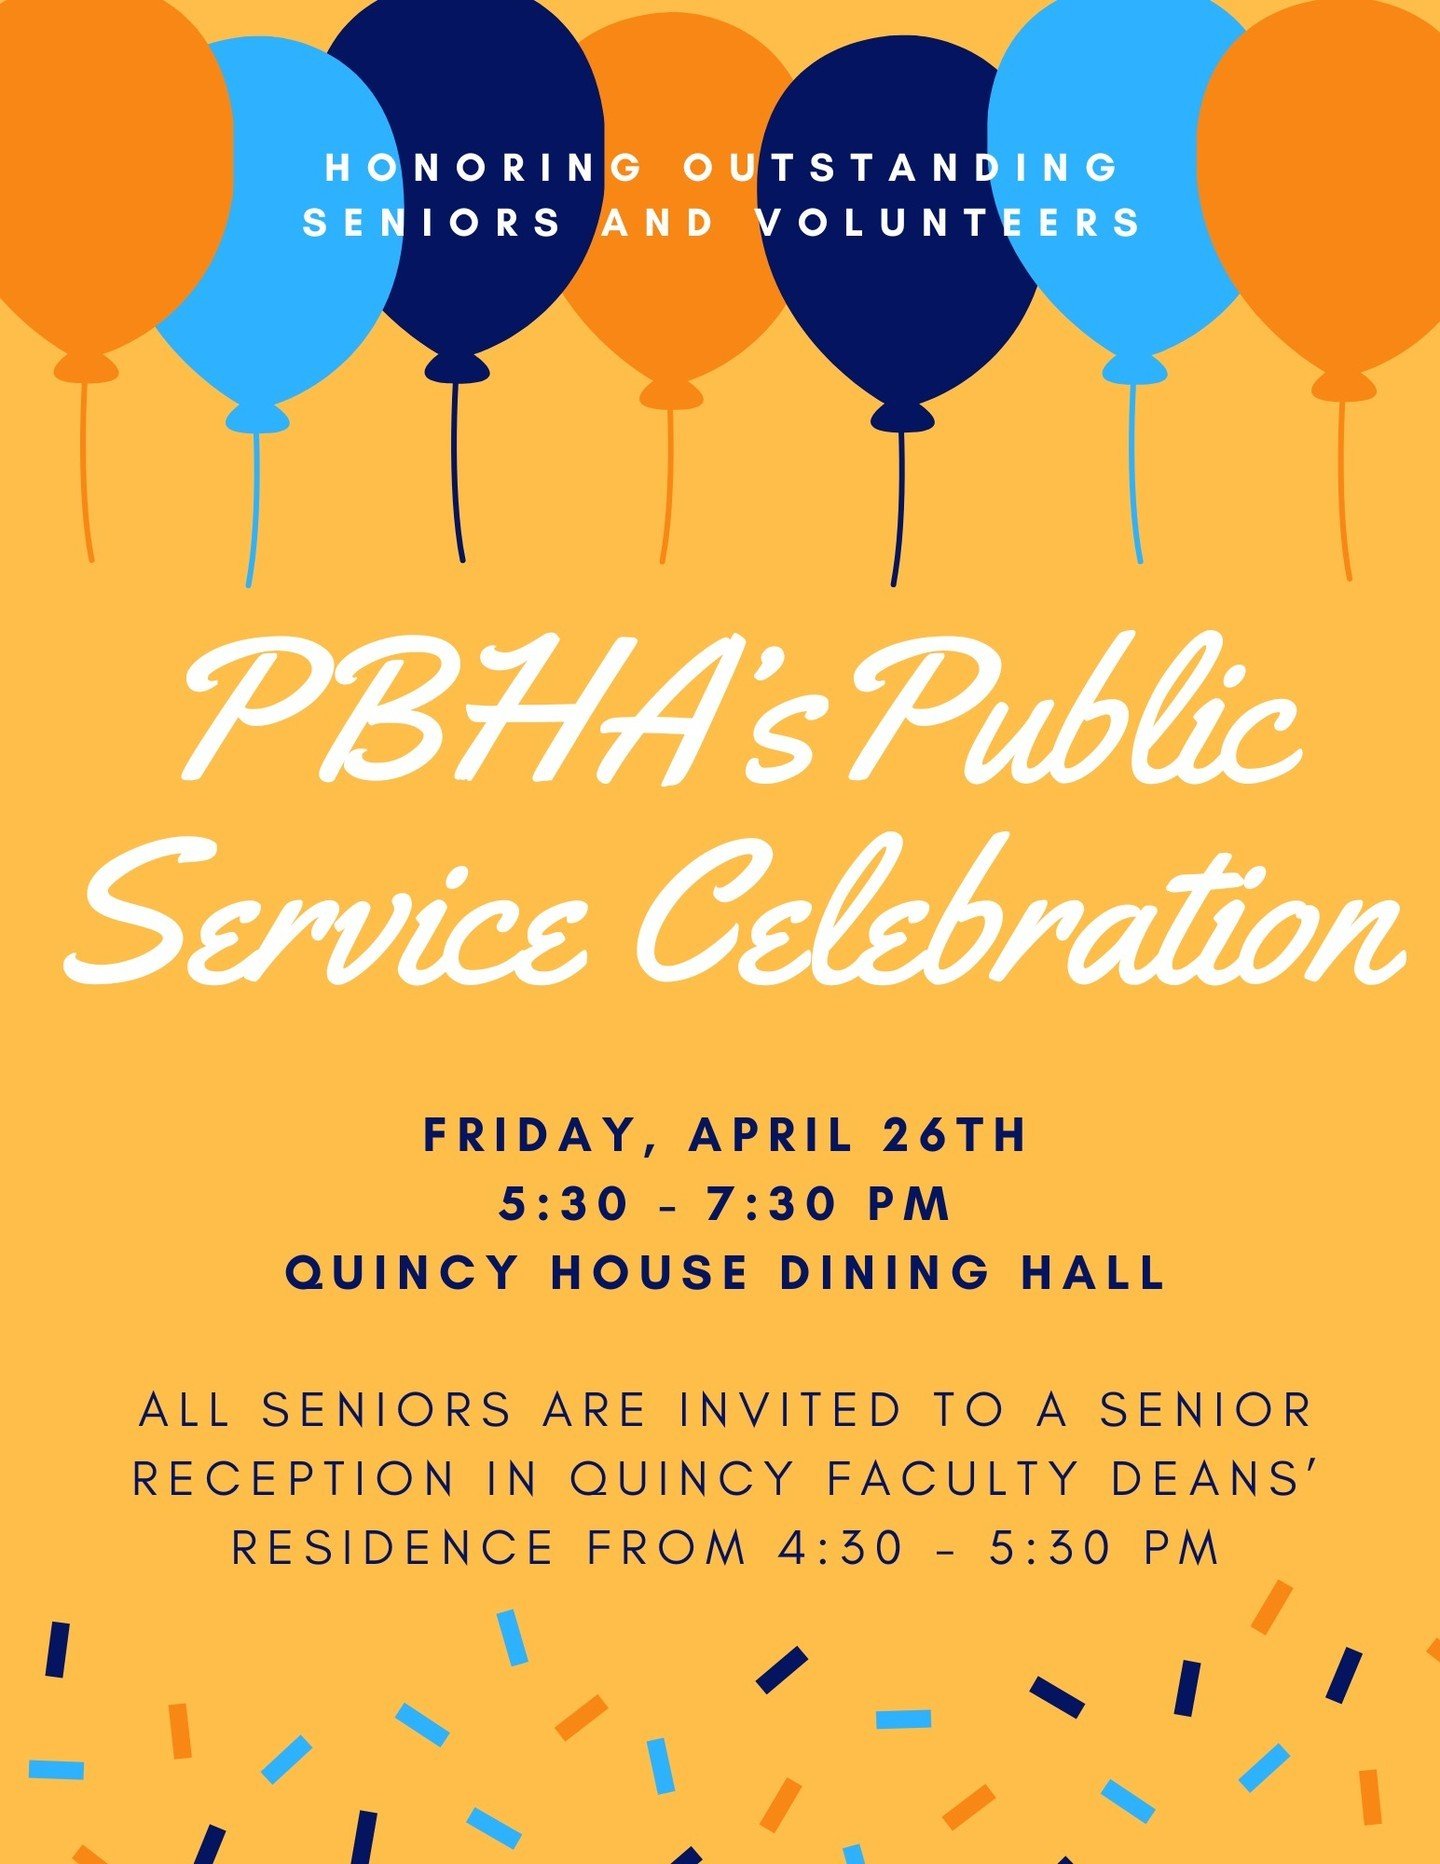 Attention Seniors and PBHA volunteers! 

Next Friday is our annual Public Service Celebration! Join us in Quincy House Dining Hall from 5:30pm - 7:30pm to recognize and celebrate our fabulous Seniors and all the amazing work they have done!